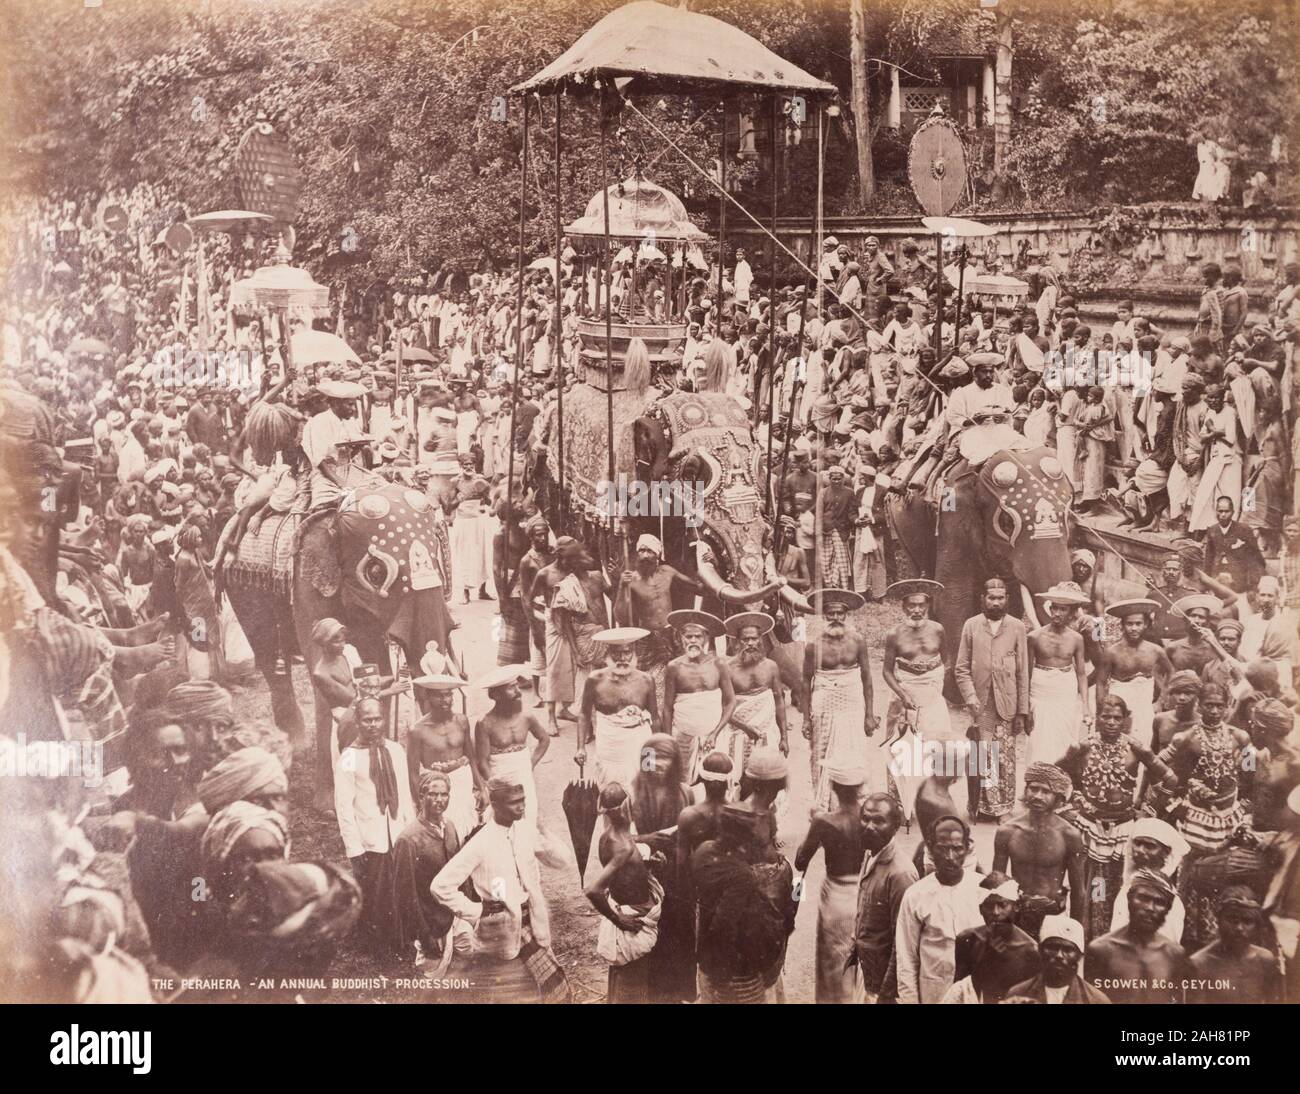 CeylonSri Lanka, Crowds of people pack the streets at an annual Buddhist perahera (procession) in Kandy in honour of the Sacred Relic of the Buddha's Tooth. The procession is headed by three decorated elephants. Printed caption: THE PERAHERA - AN ANNUAL BUDDHIST PROCESSION -SCOWEN & Co. CEYLON.Contemporary manuscript caption: The Perahera an annual Buddlhist Procession Ceylon, circa 1885. 2003/071/1/1/2/8. Stock Photo